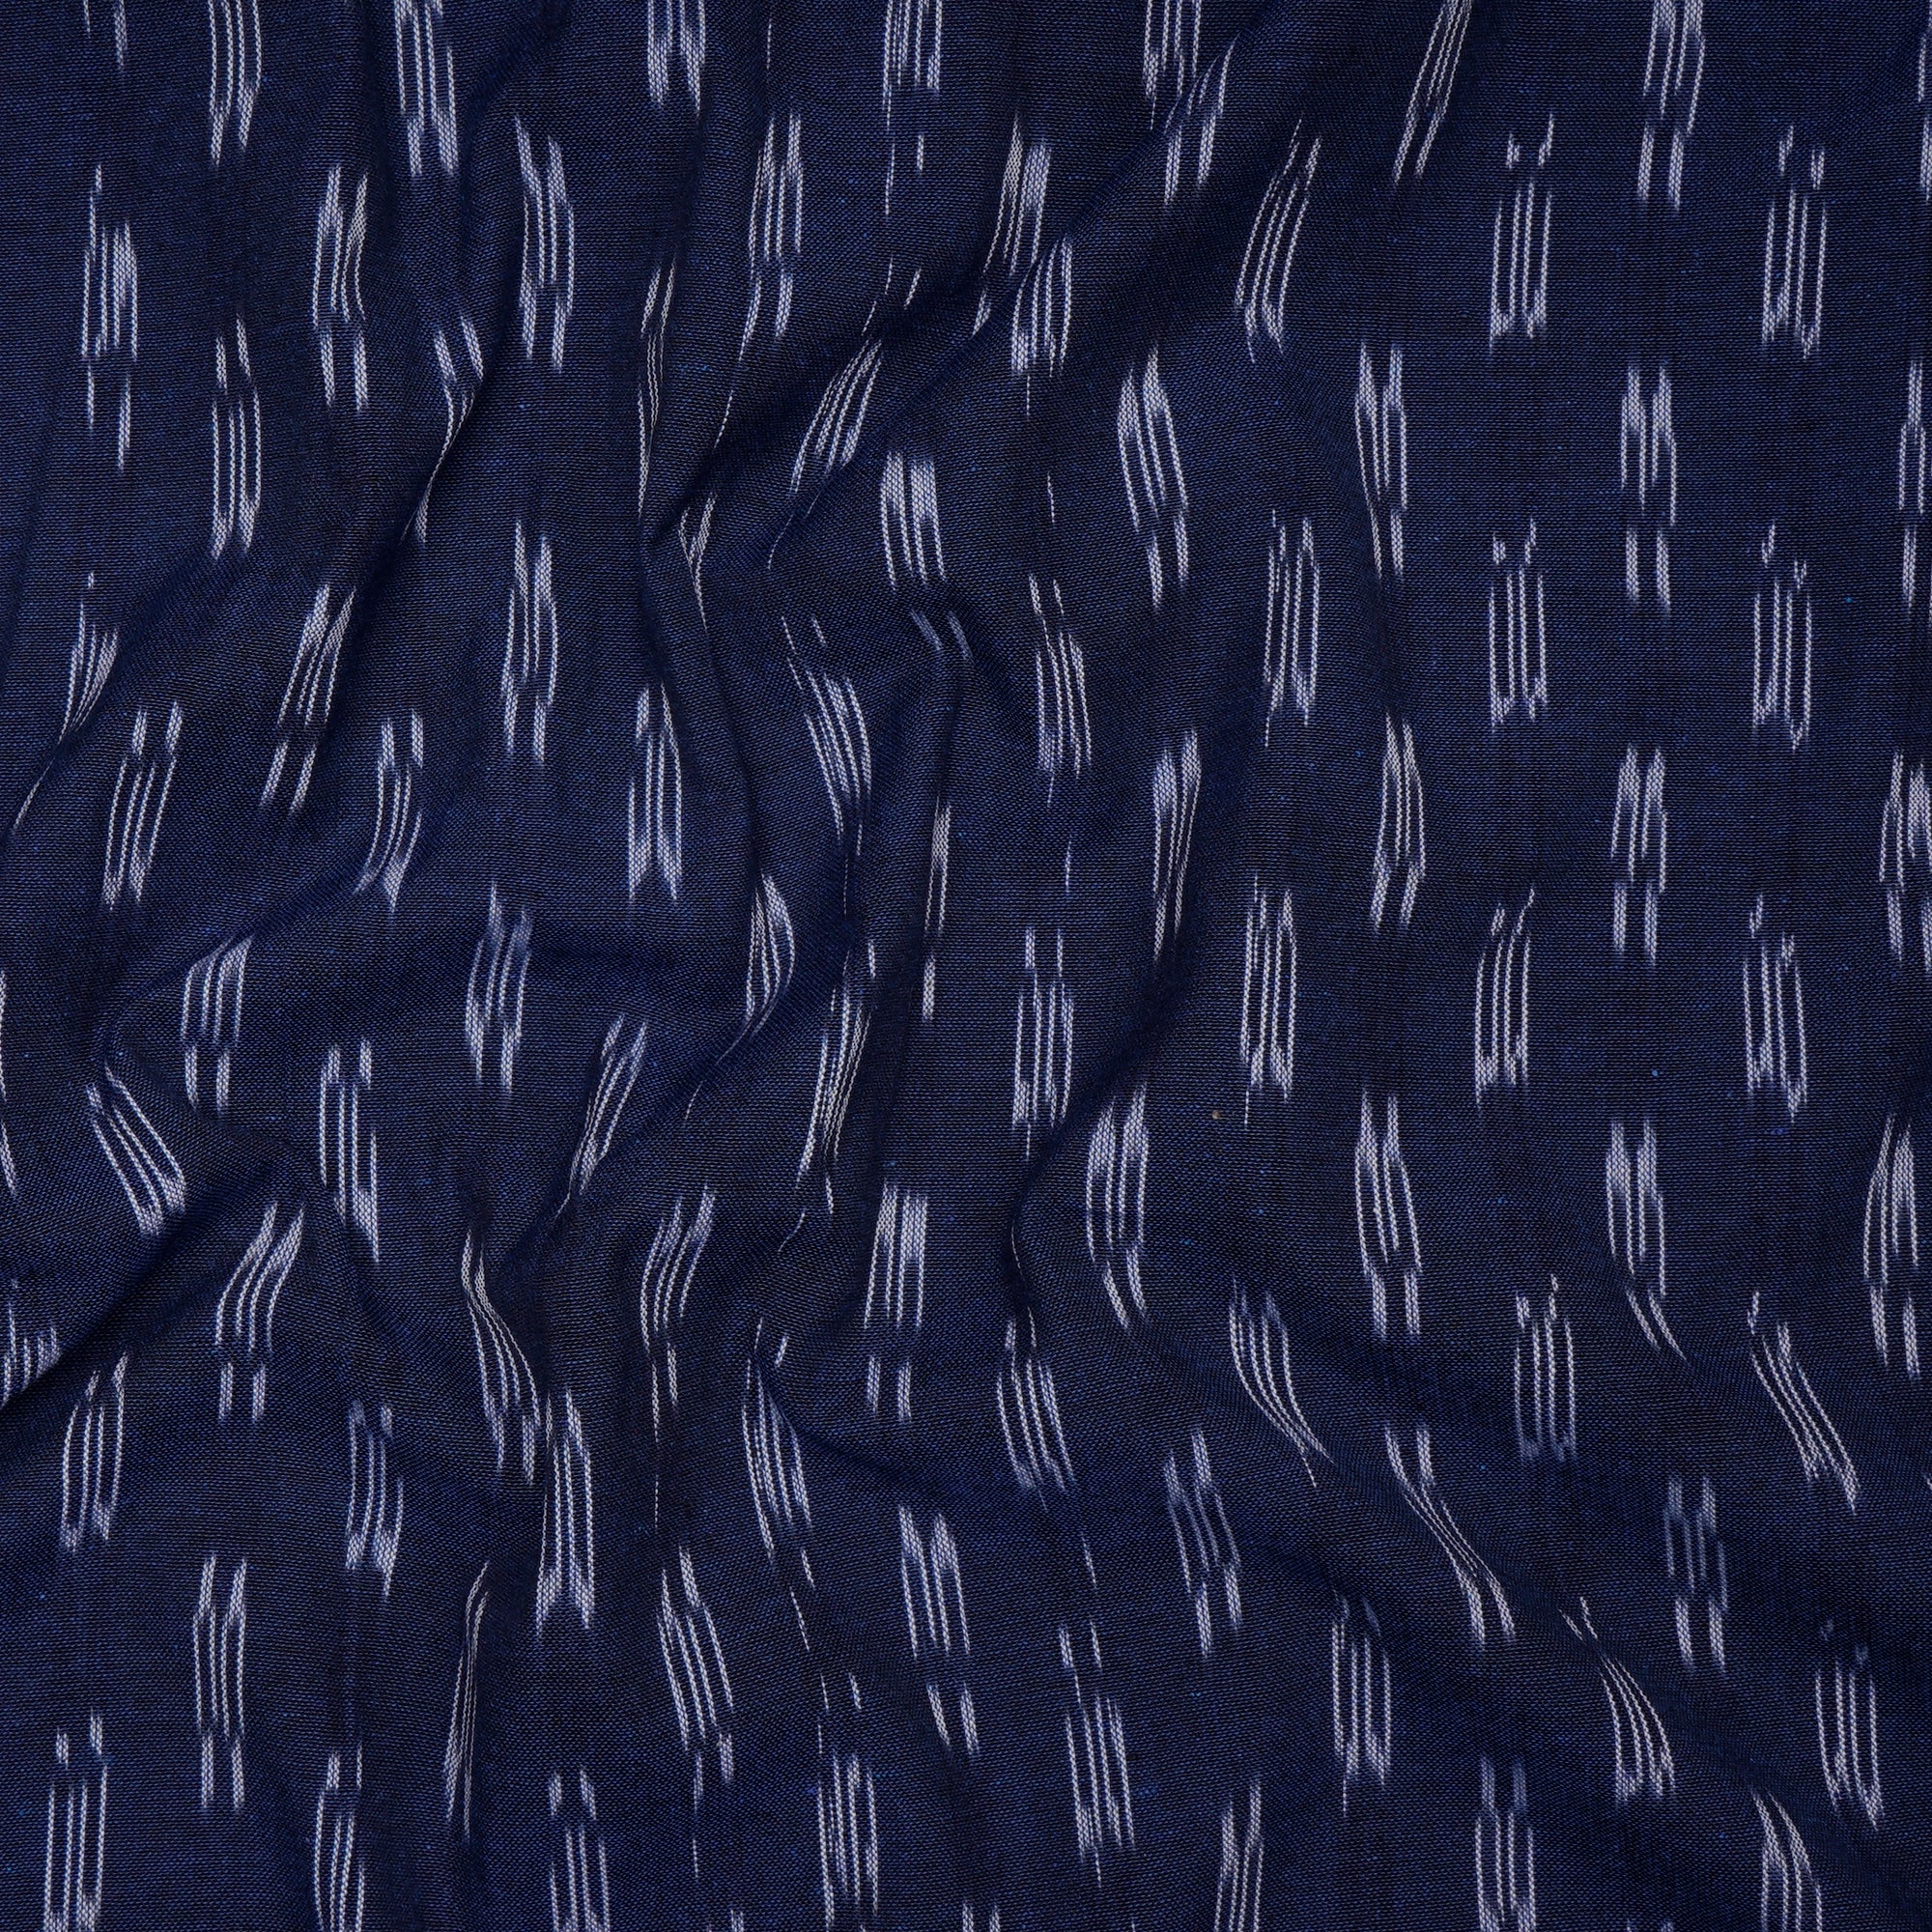 Navy Blue Washed Woven Ikat Cotton Fabric